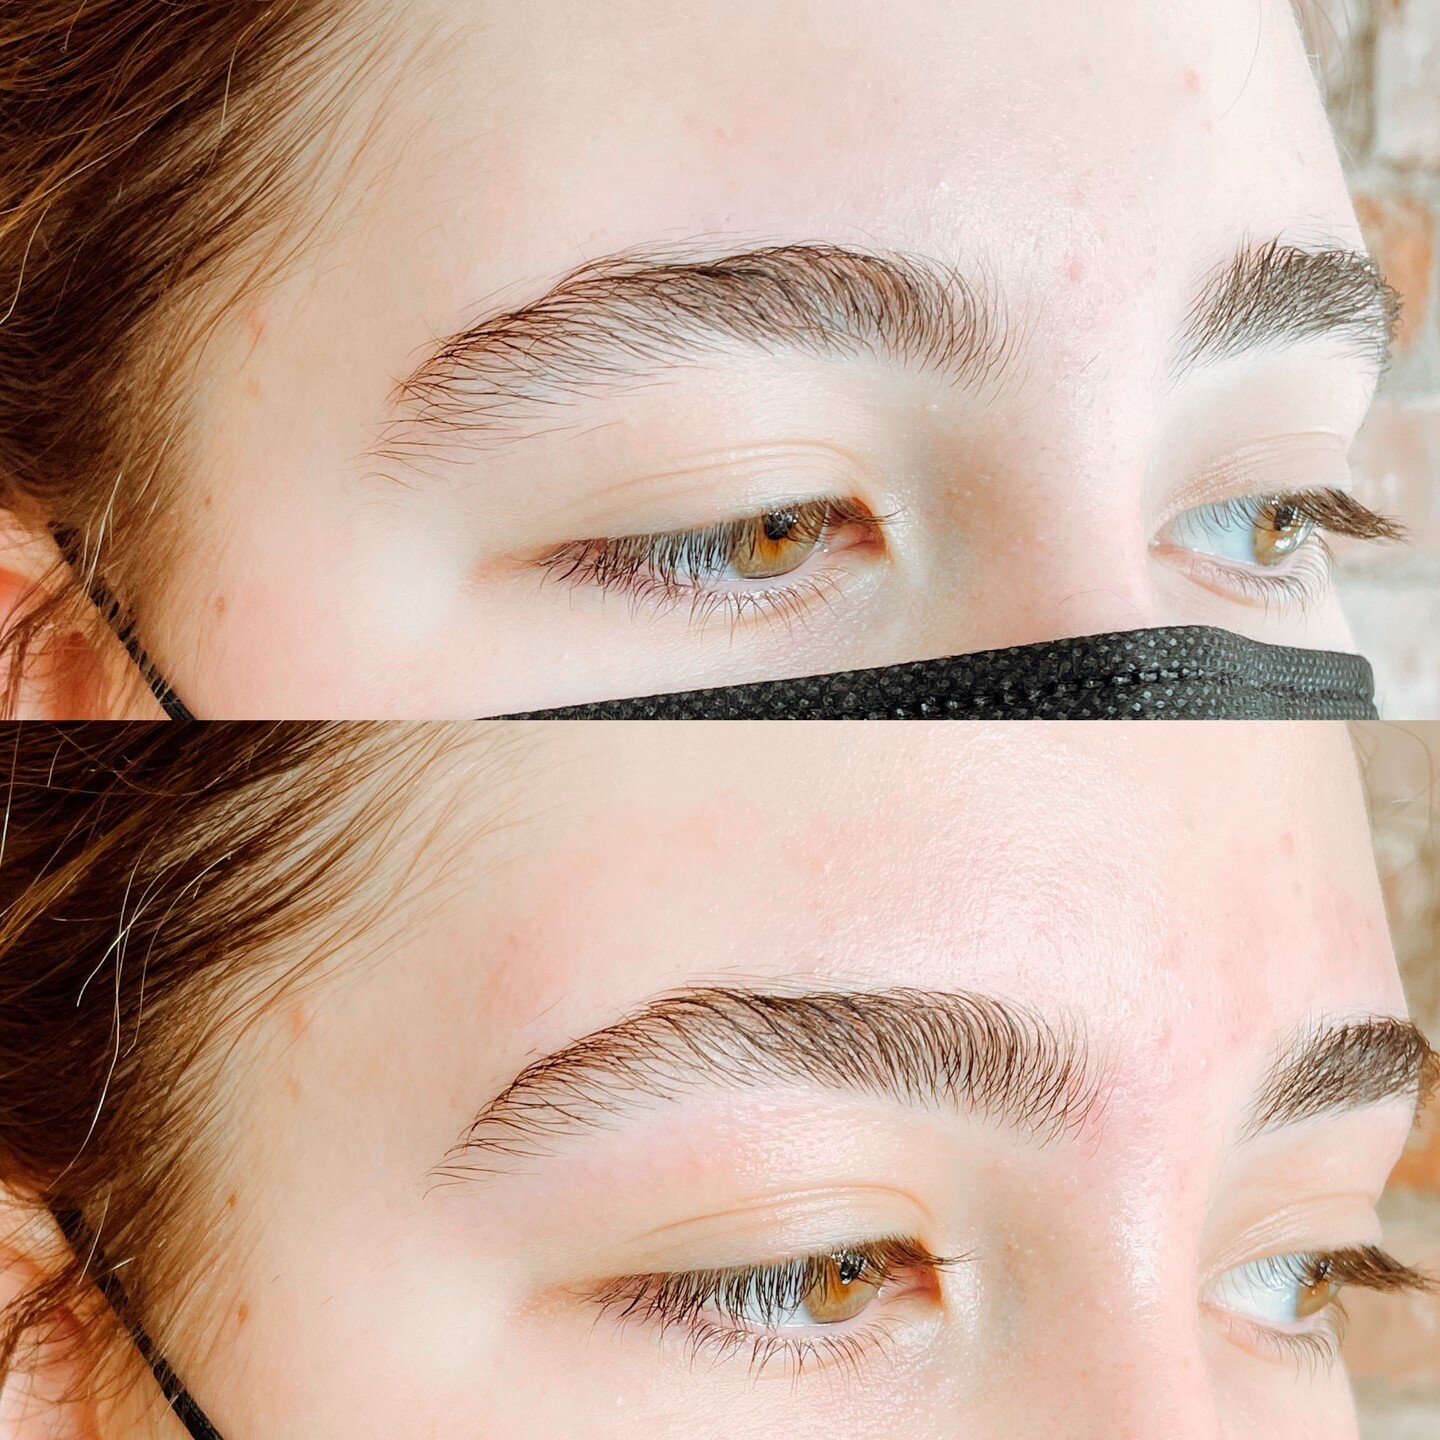 We're all about keeping your brows full and fluffy! 🧡

#instabrows #naturalbrows #boldbrows #browshape #fluffybrows #browsoftheday #naturalbeauty #browcare #browwaxing #browshaping #browtinting #browtweezing #eyebrowlamination